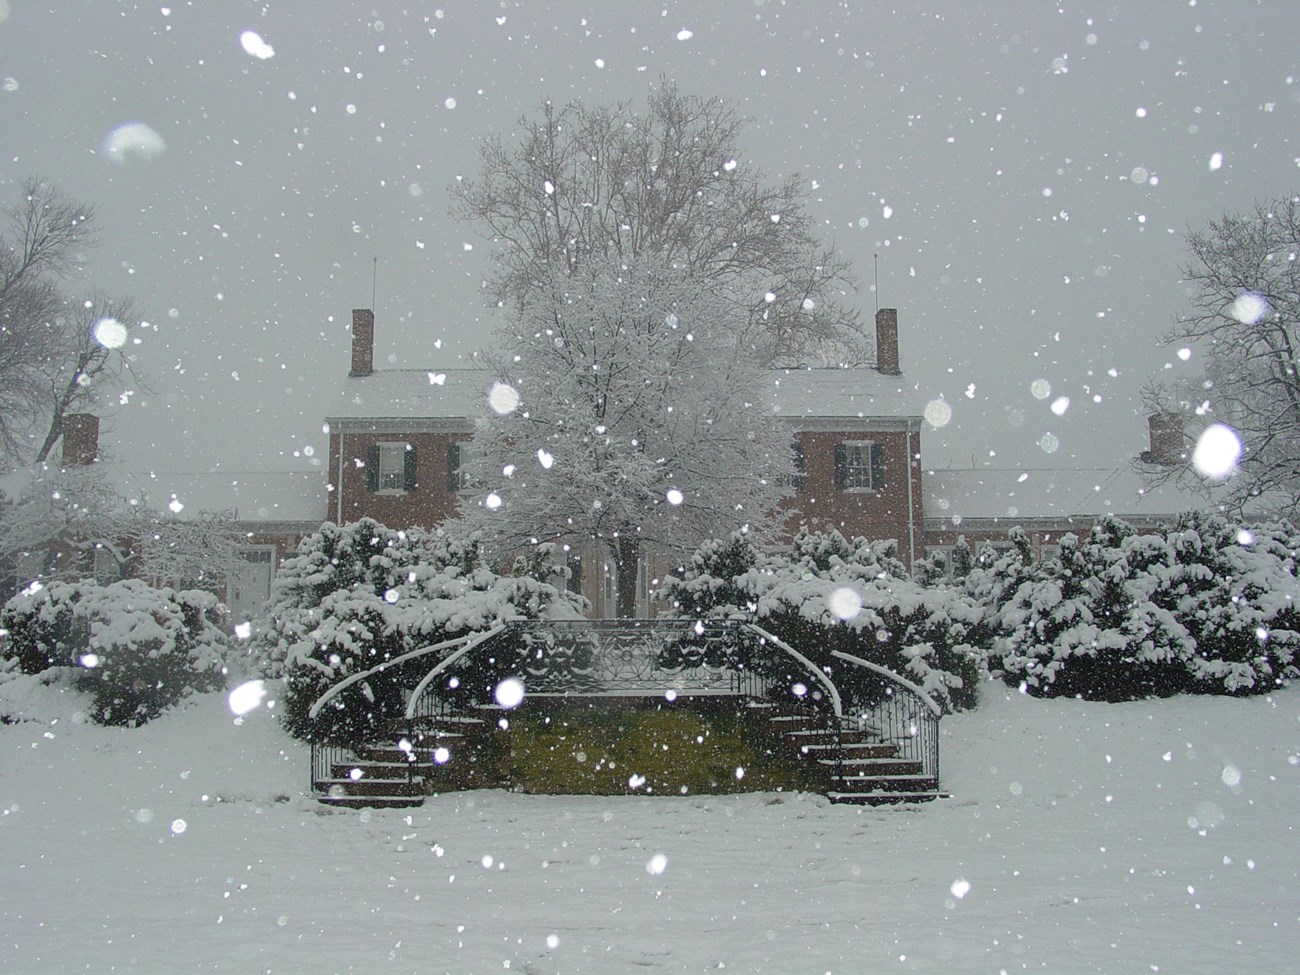 Large brick house with steps leading up to terraces during snow storm